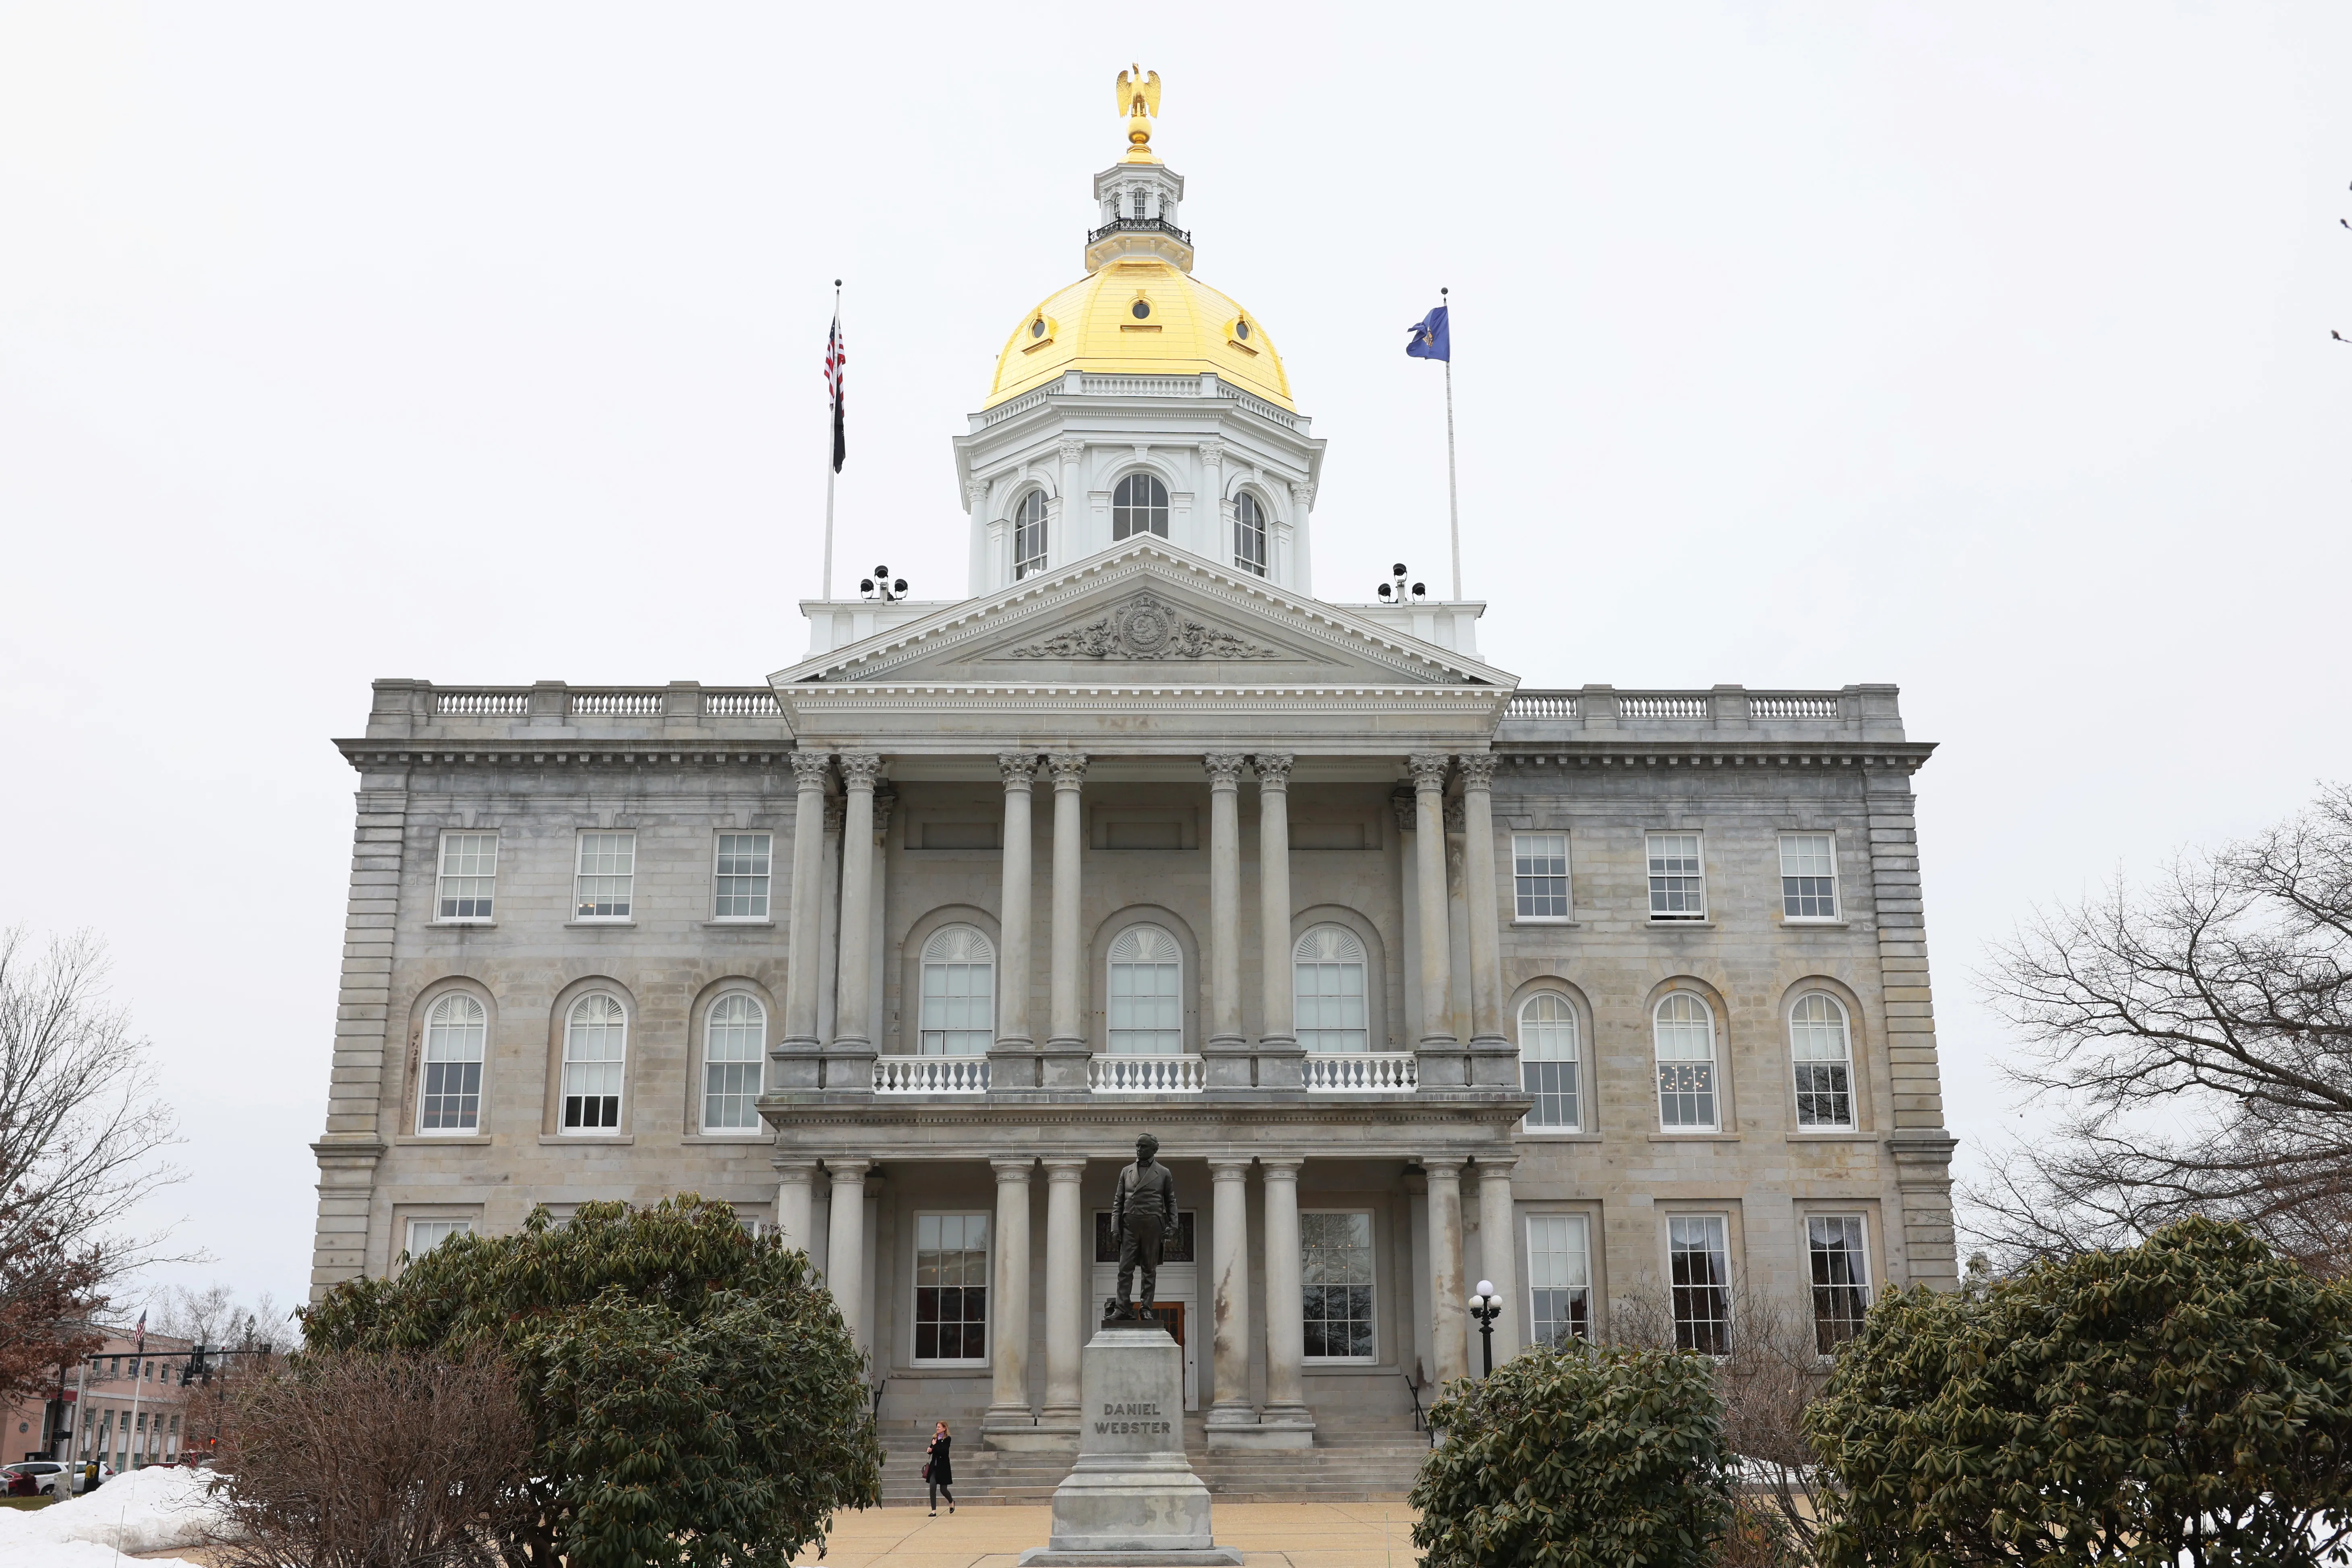 The state capitol building of New Hampshire  in Concord, New Hampshire.?w=200&h=150